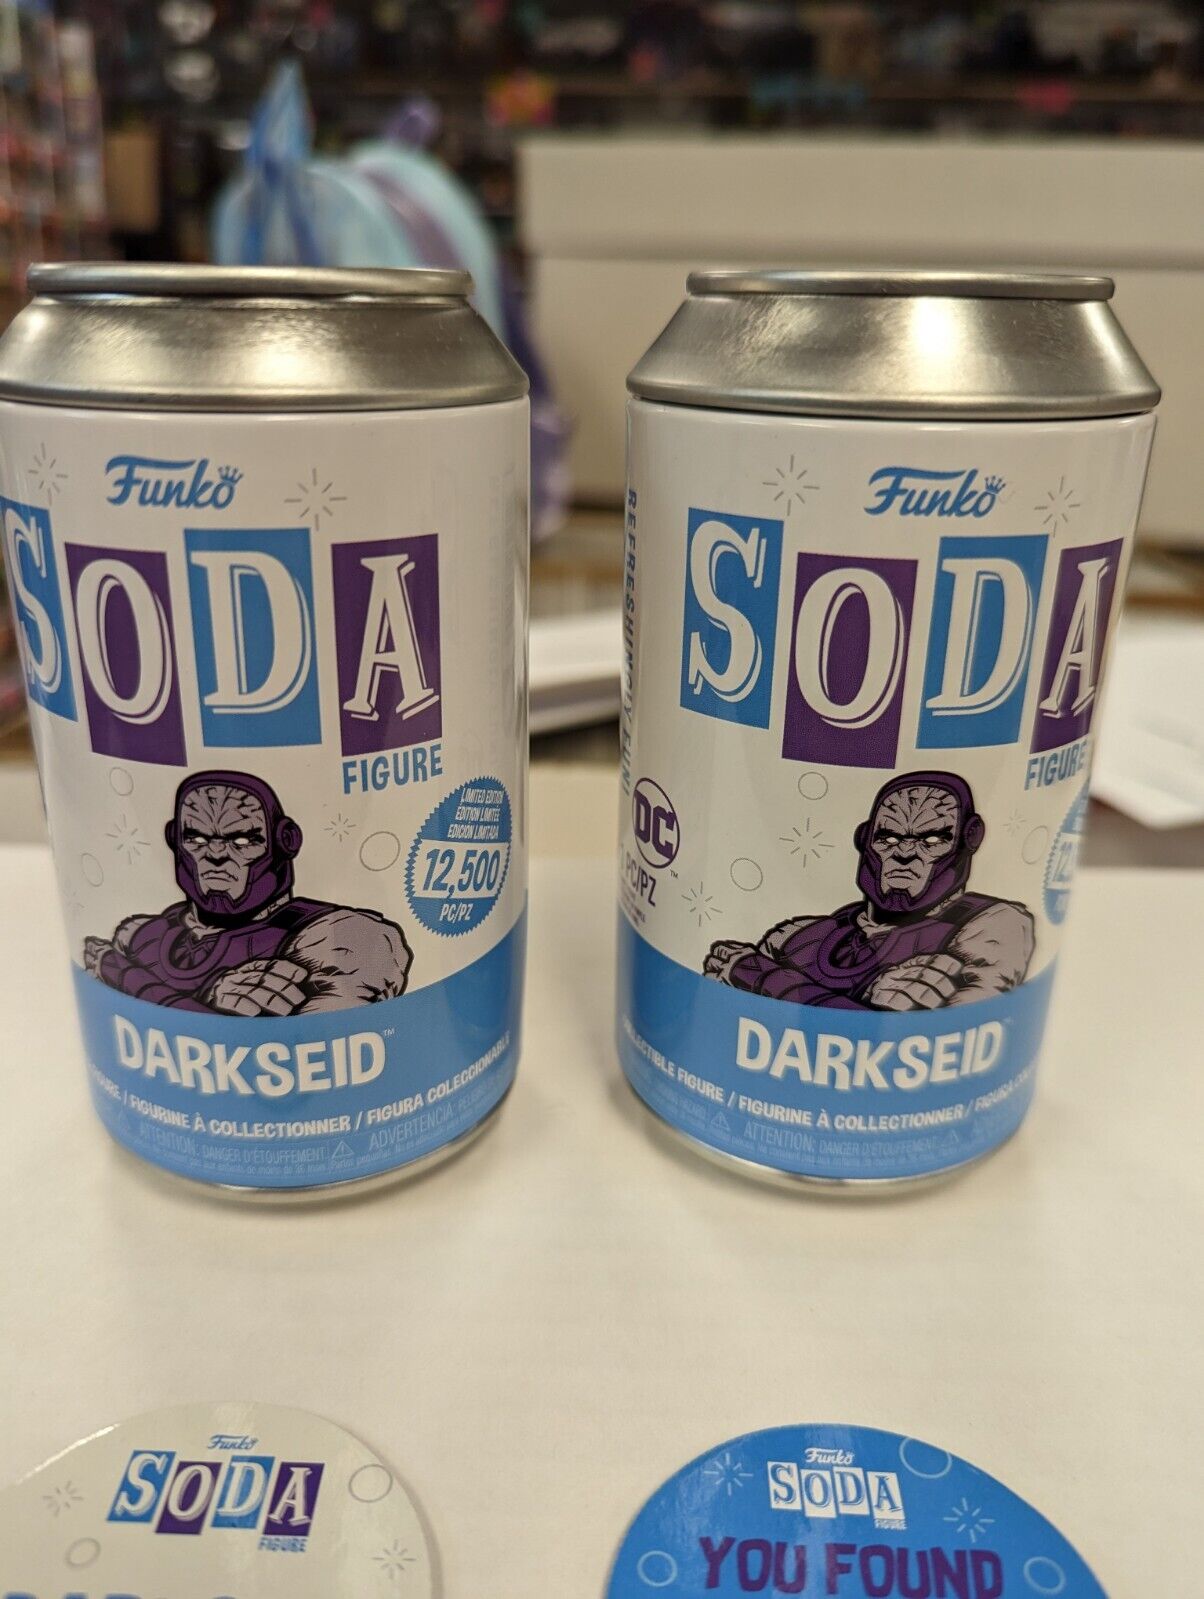 Funko Soda Set Darkseid With Weapon Chase 1/2000 and Darkseid Common 1/10500